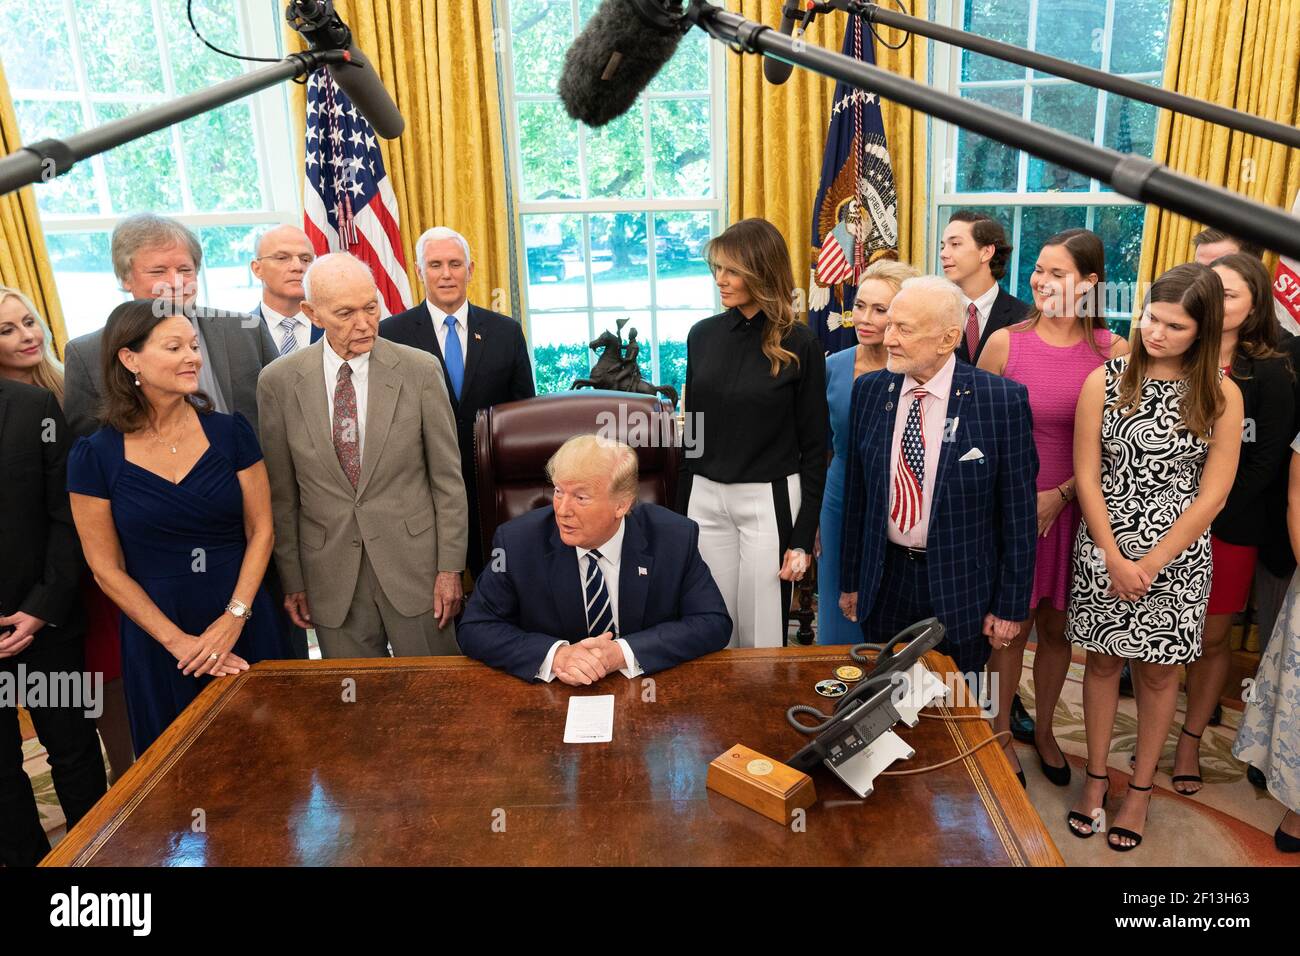 President Donald Trump joined by First Lady Melania Trump and Vice President Mike Pence speaks to reporters during a commemorative photo opportunity with Apollo 11 astronauts Buzz Aldrin and Michael Collins their family members and the family of Neil Armstrong Friday July 19 2019 during a celebration of the 50th anniversary of the Apollo 11 moon landing in the Oval Office of the White House. Stock Photo